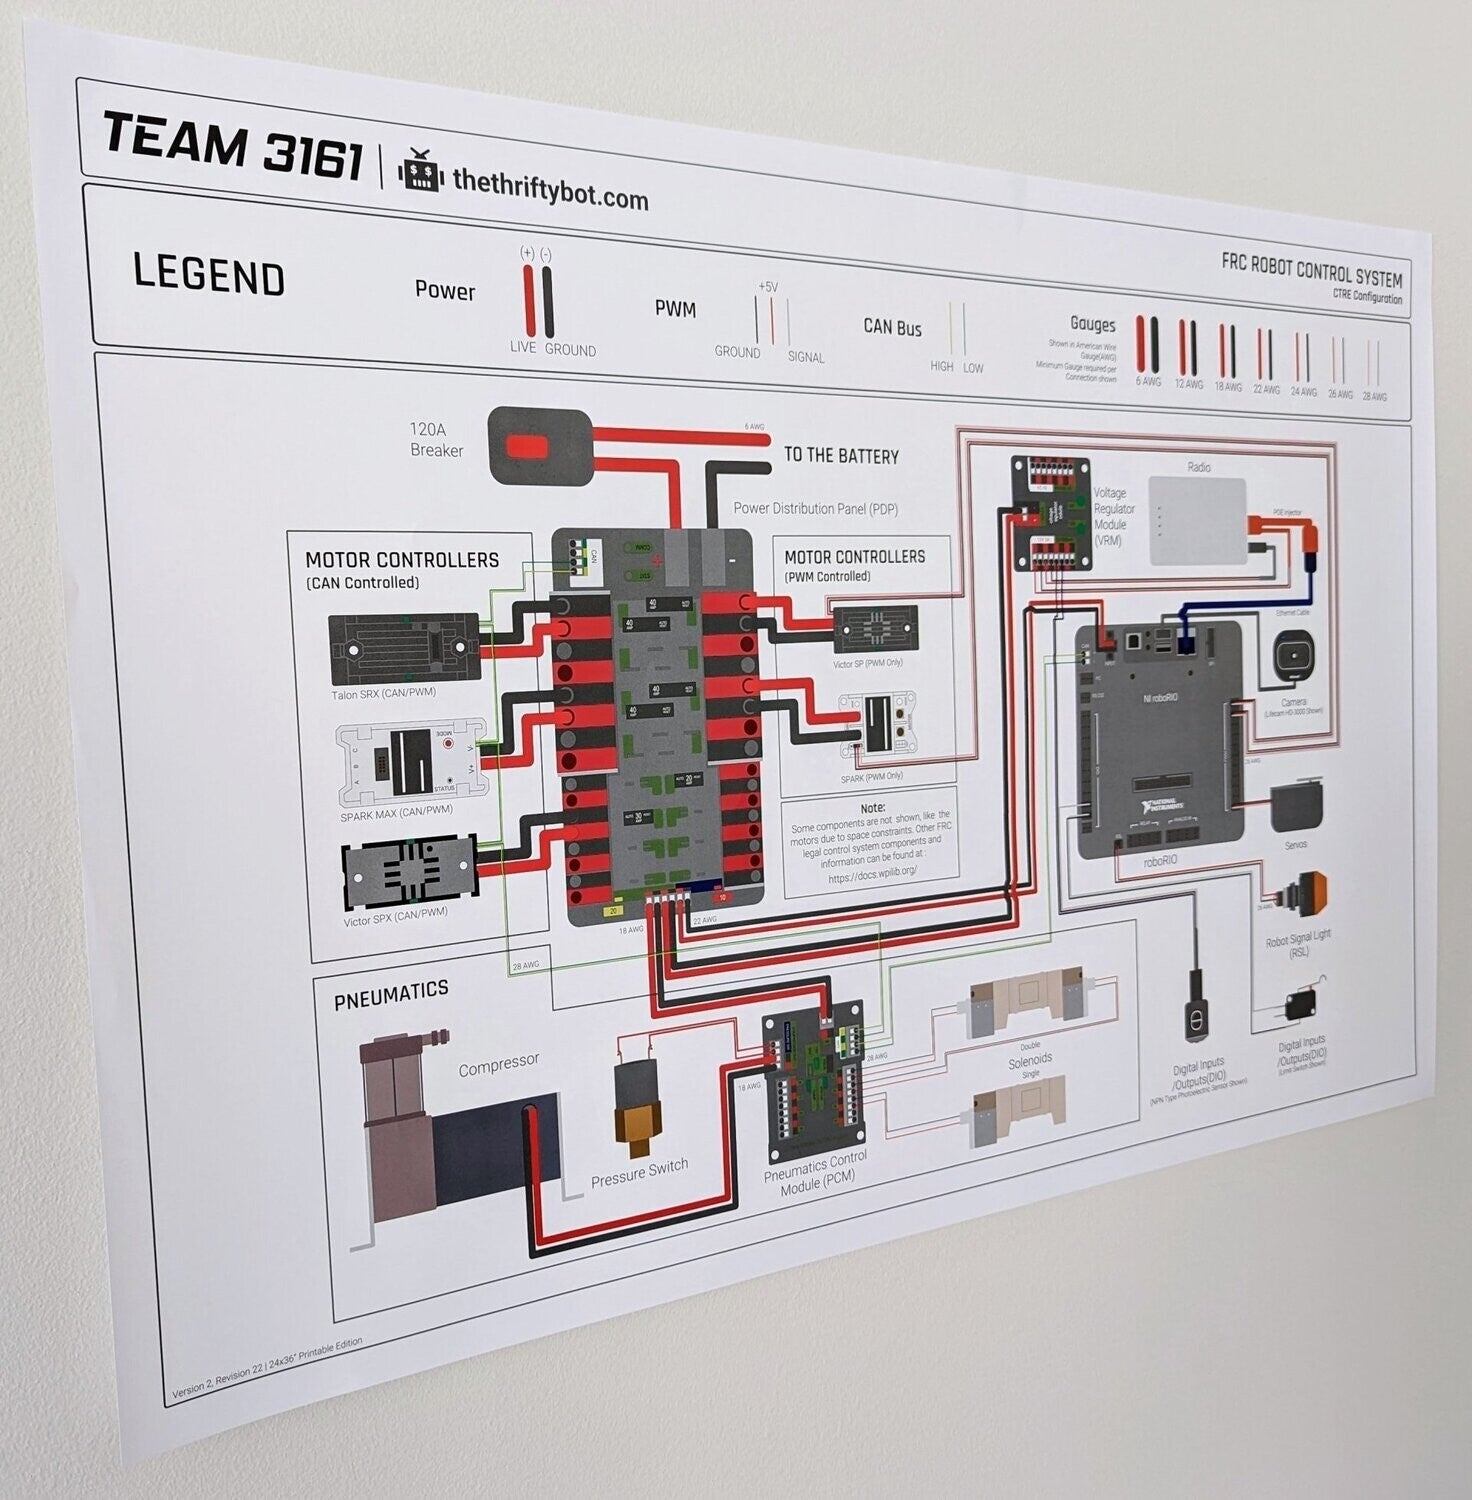 FRC Robot Control System Poster - CTRE Configuration